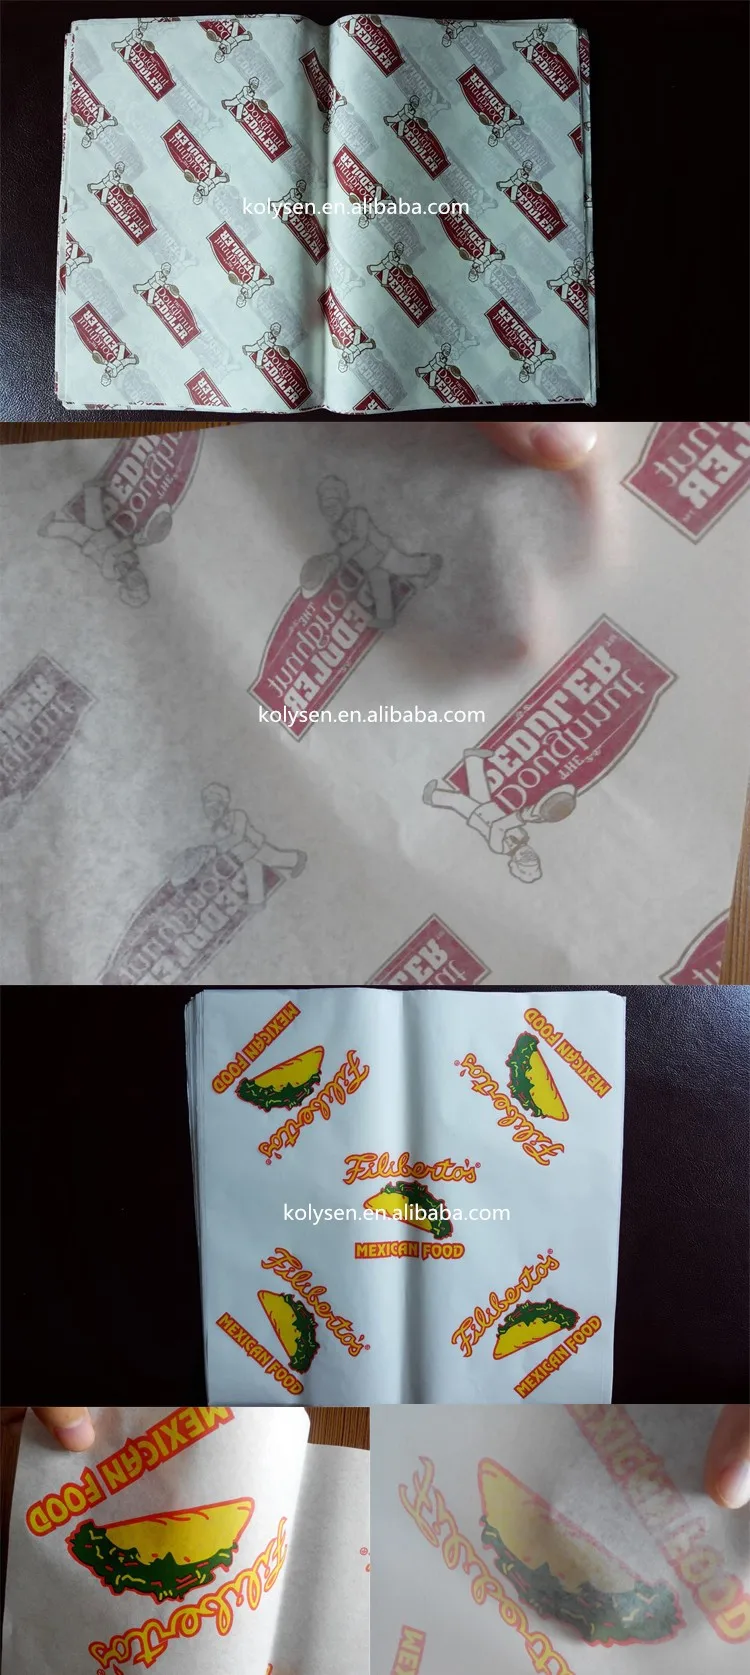 Taco and burrito grease proof wrapping paper